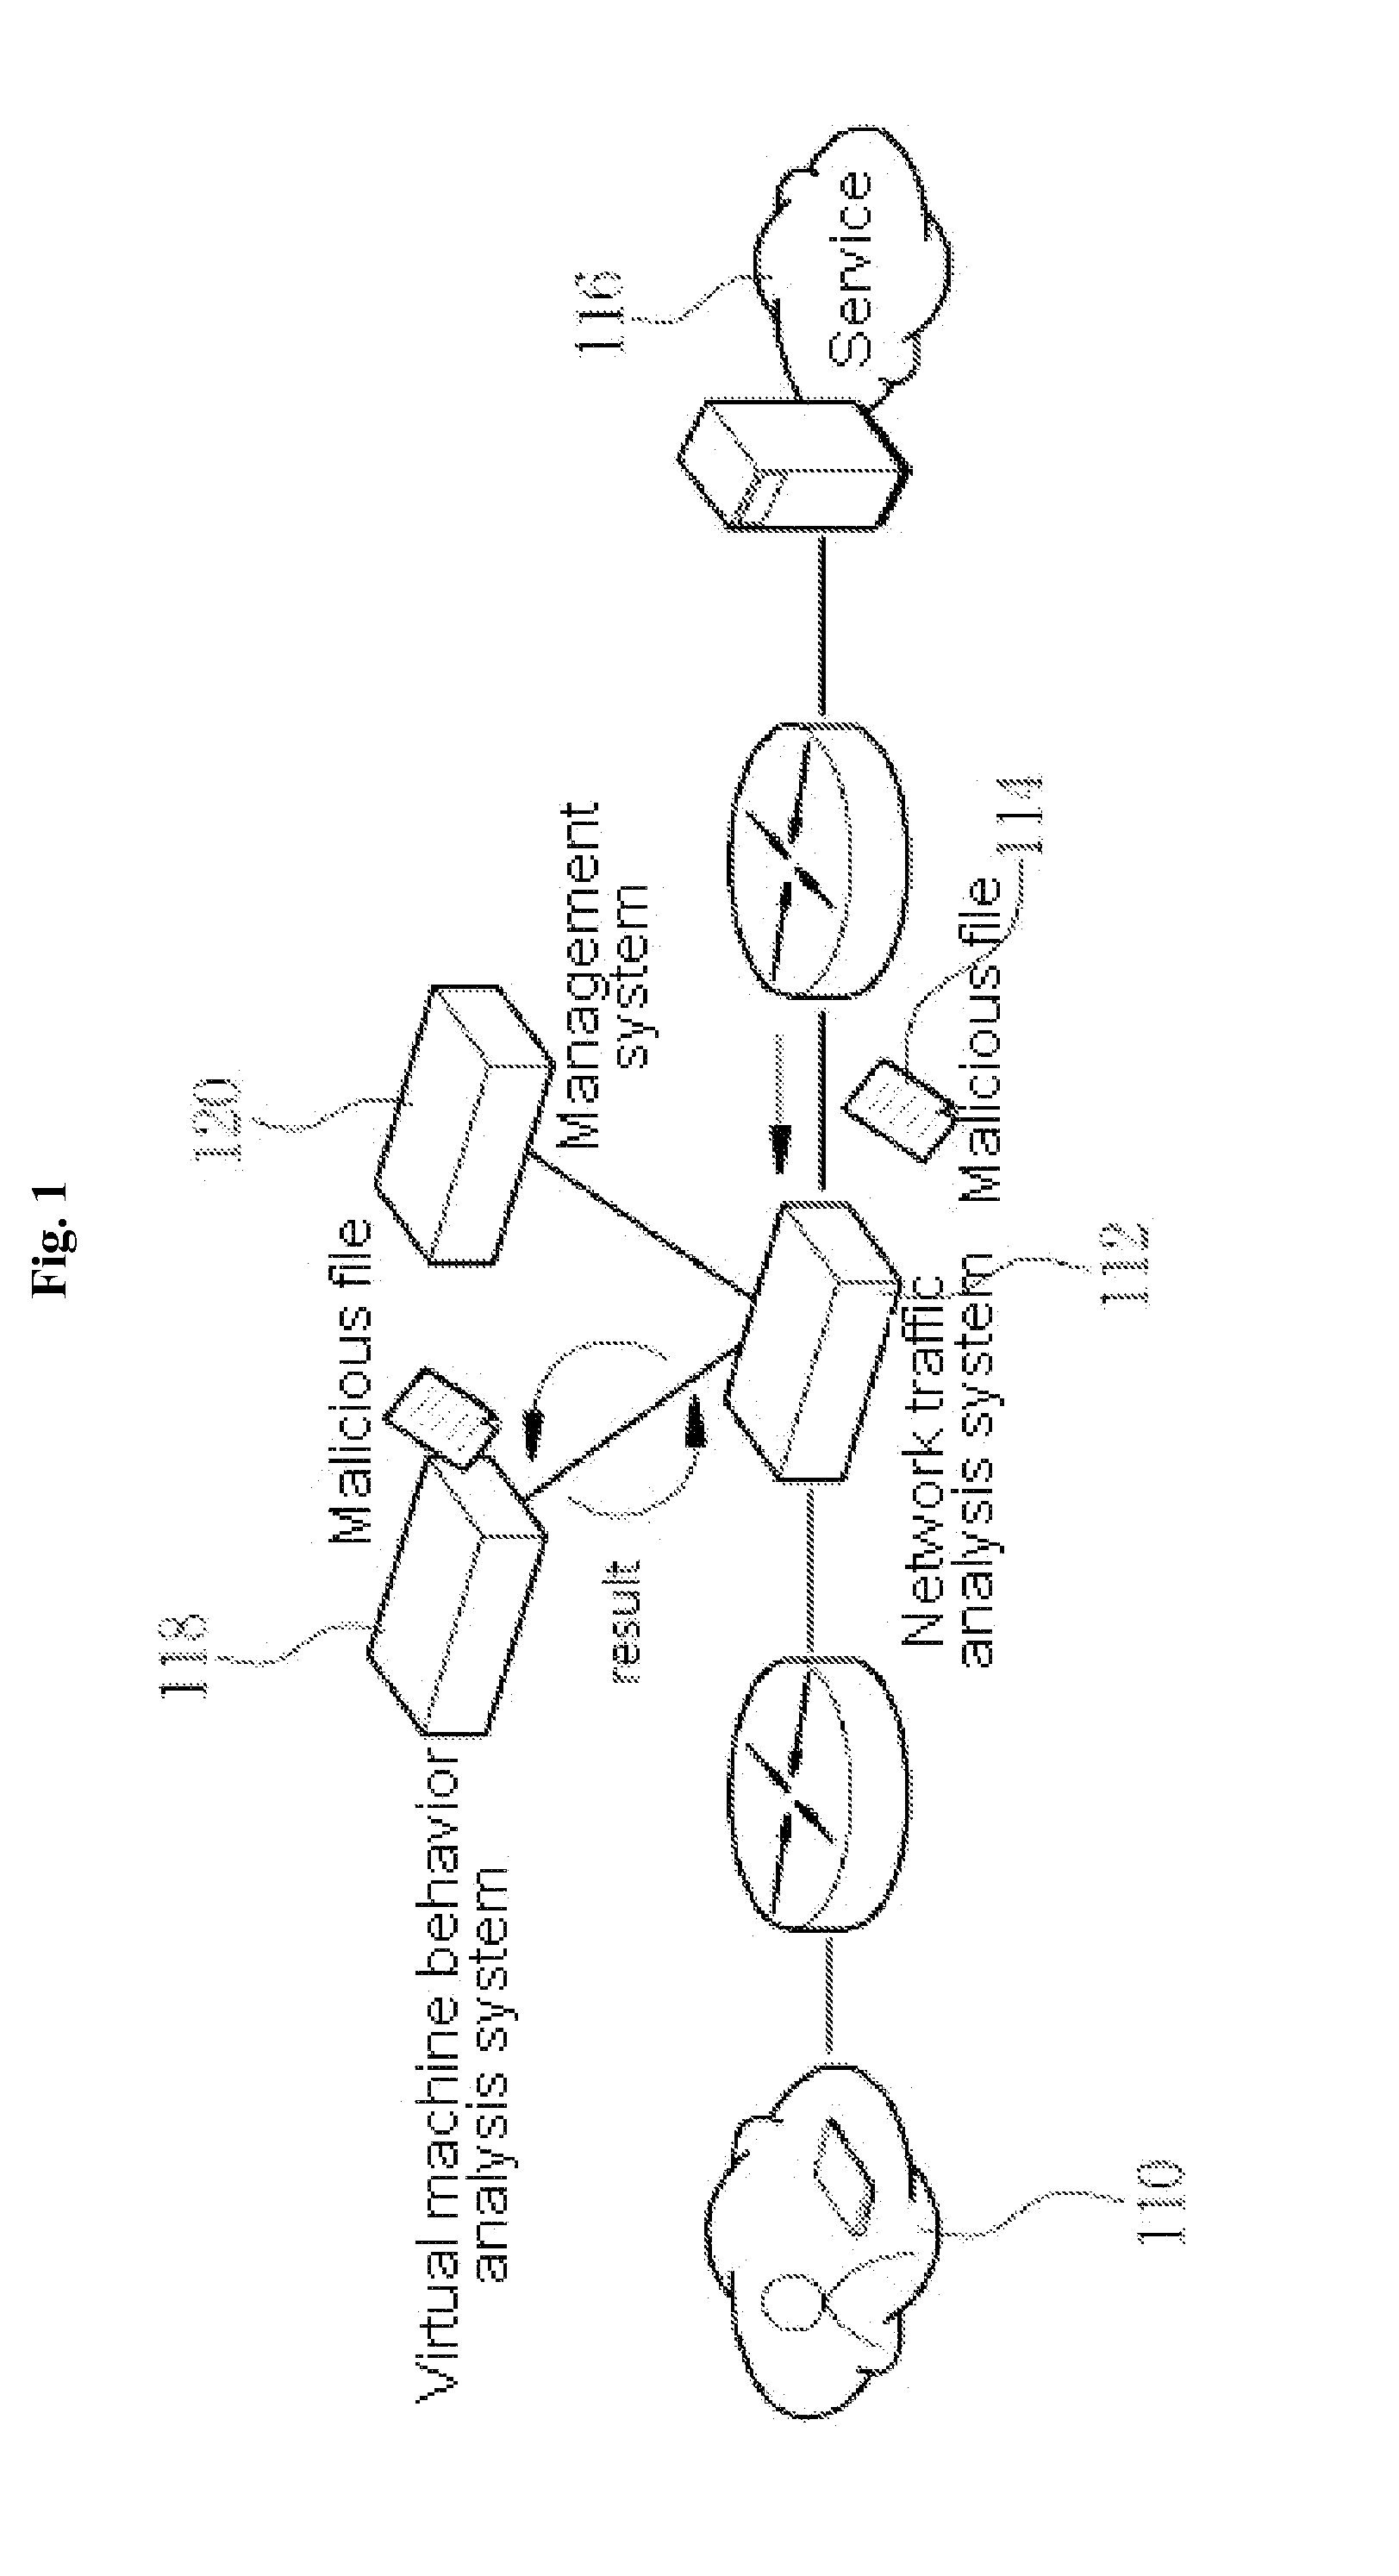 Method and apparatus for providing analysis service based on behavior in mobile network environment